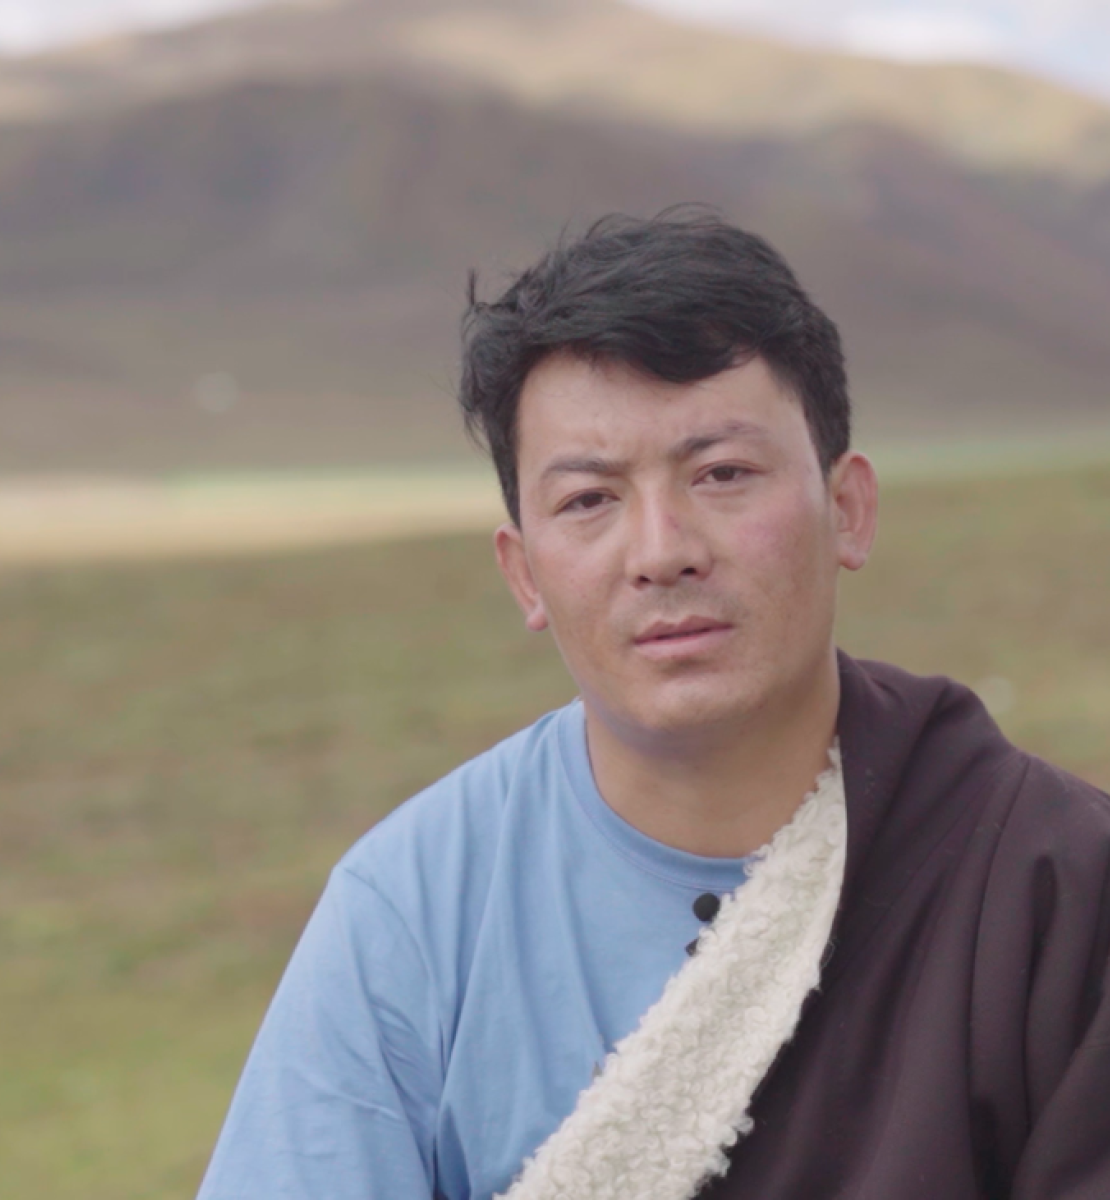 Ban Jiu, native to the Qinghai-Tibet Plateau, is one of an estimated 1.25 million people who are living with HIV (PLHIV) in China.